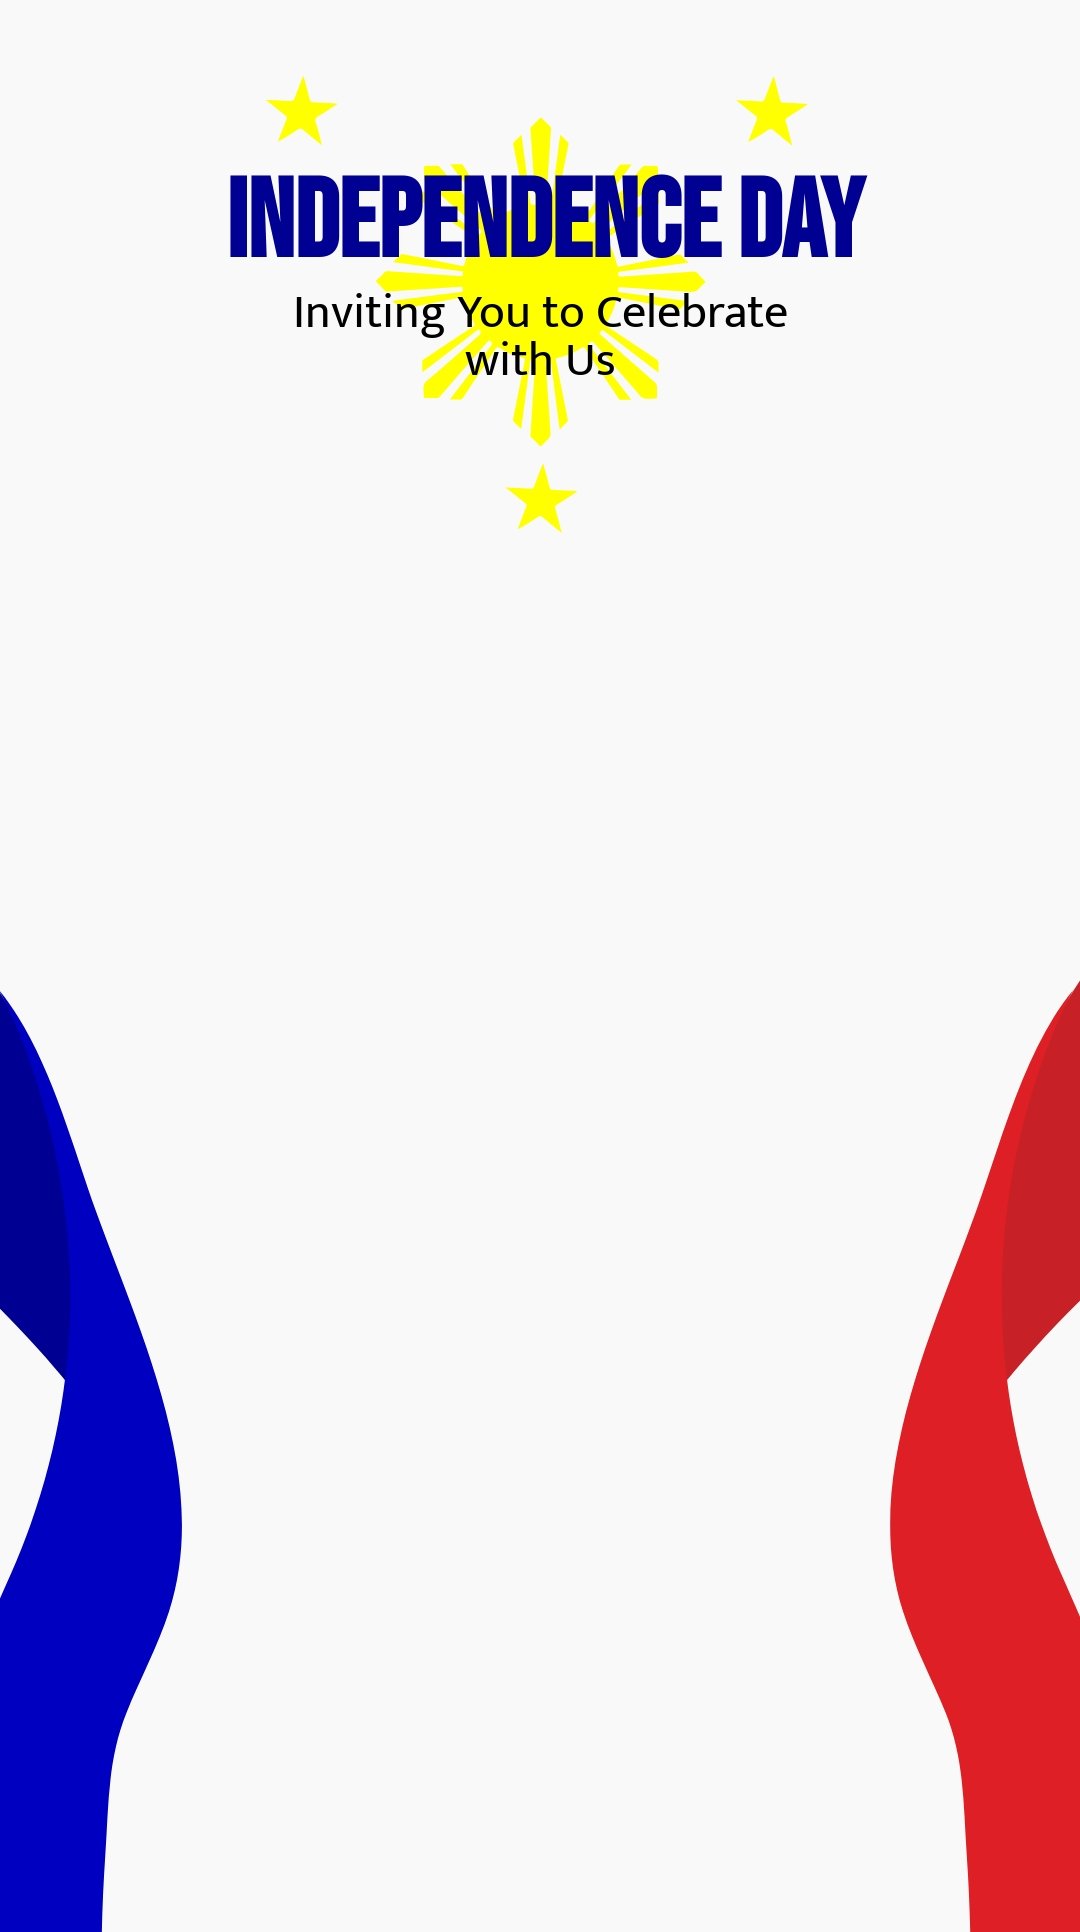 Philippines Independence Day Invitation Snapchat Geofilter Template.jpe